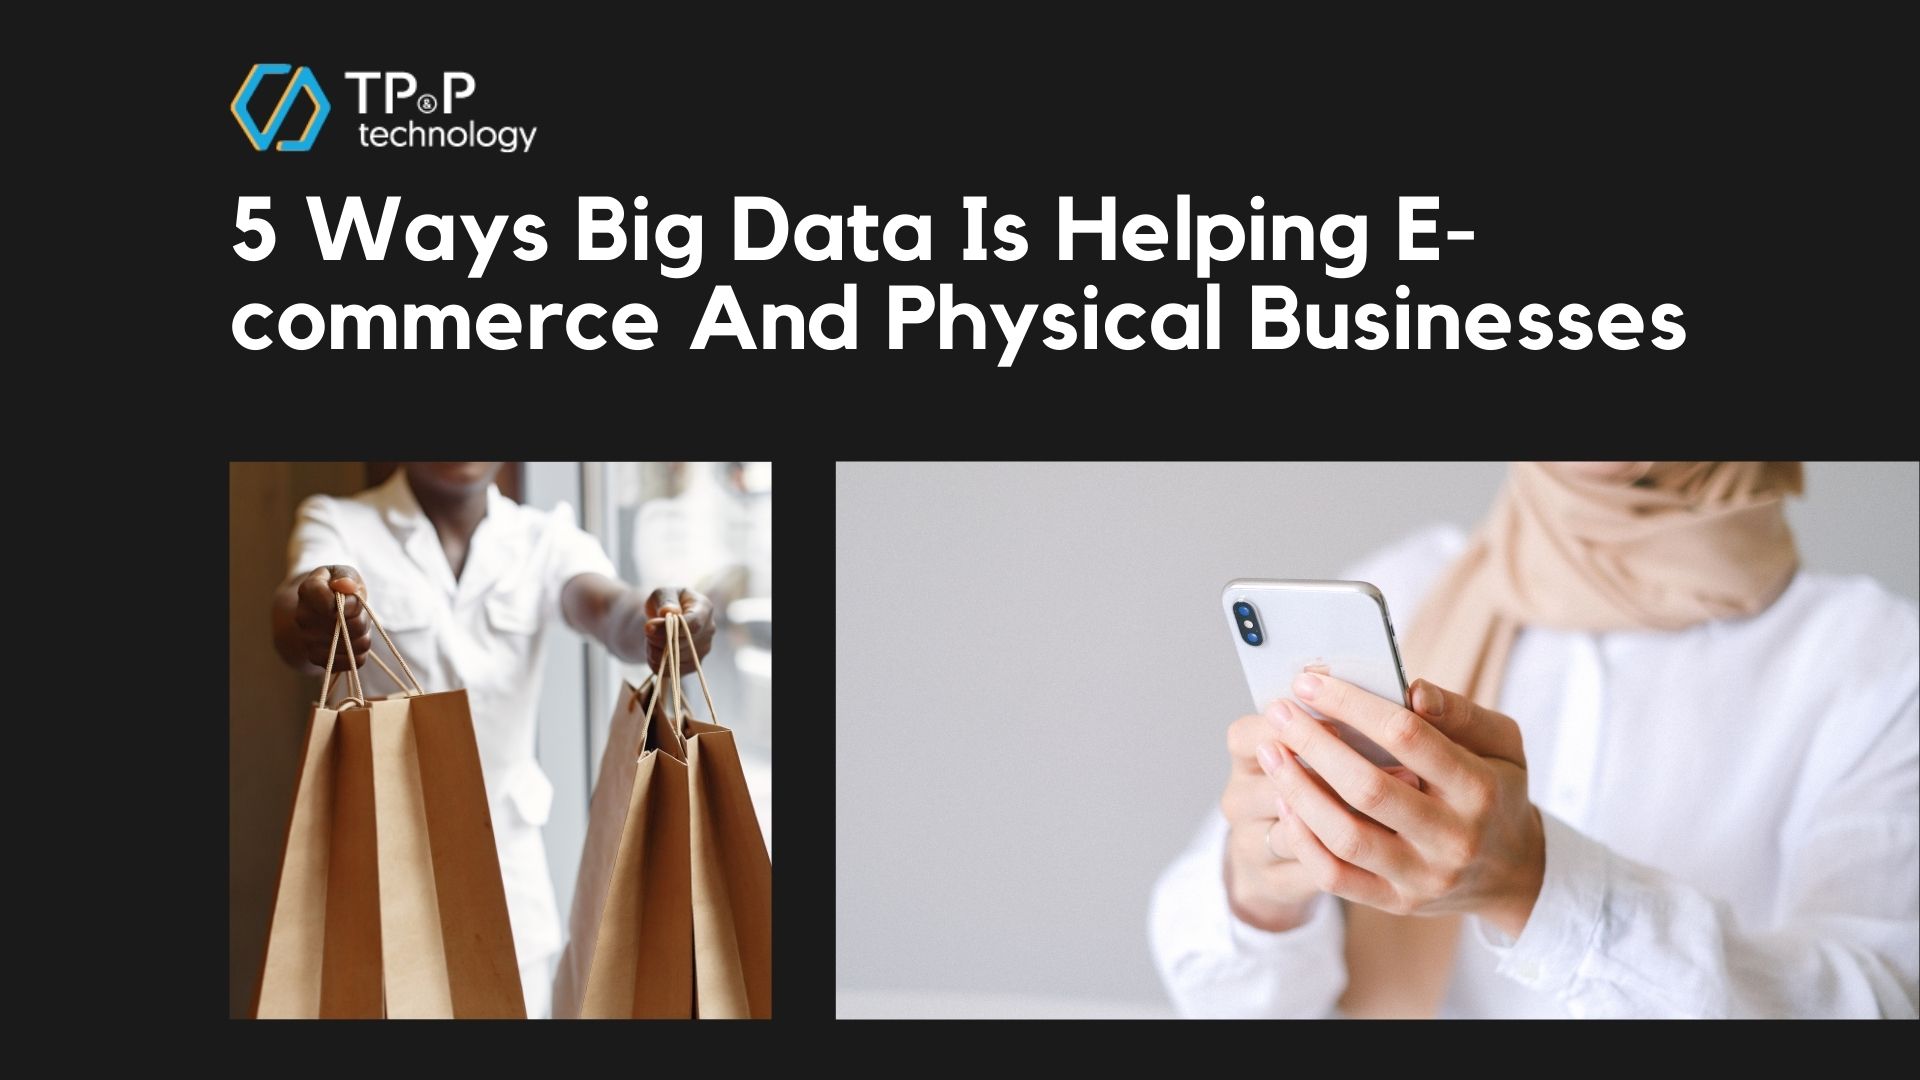 5 Ways Big Data Is Helping E-commerce And Physical Businesses